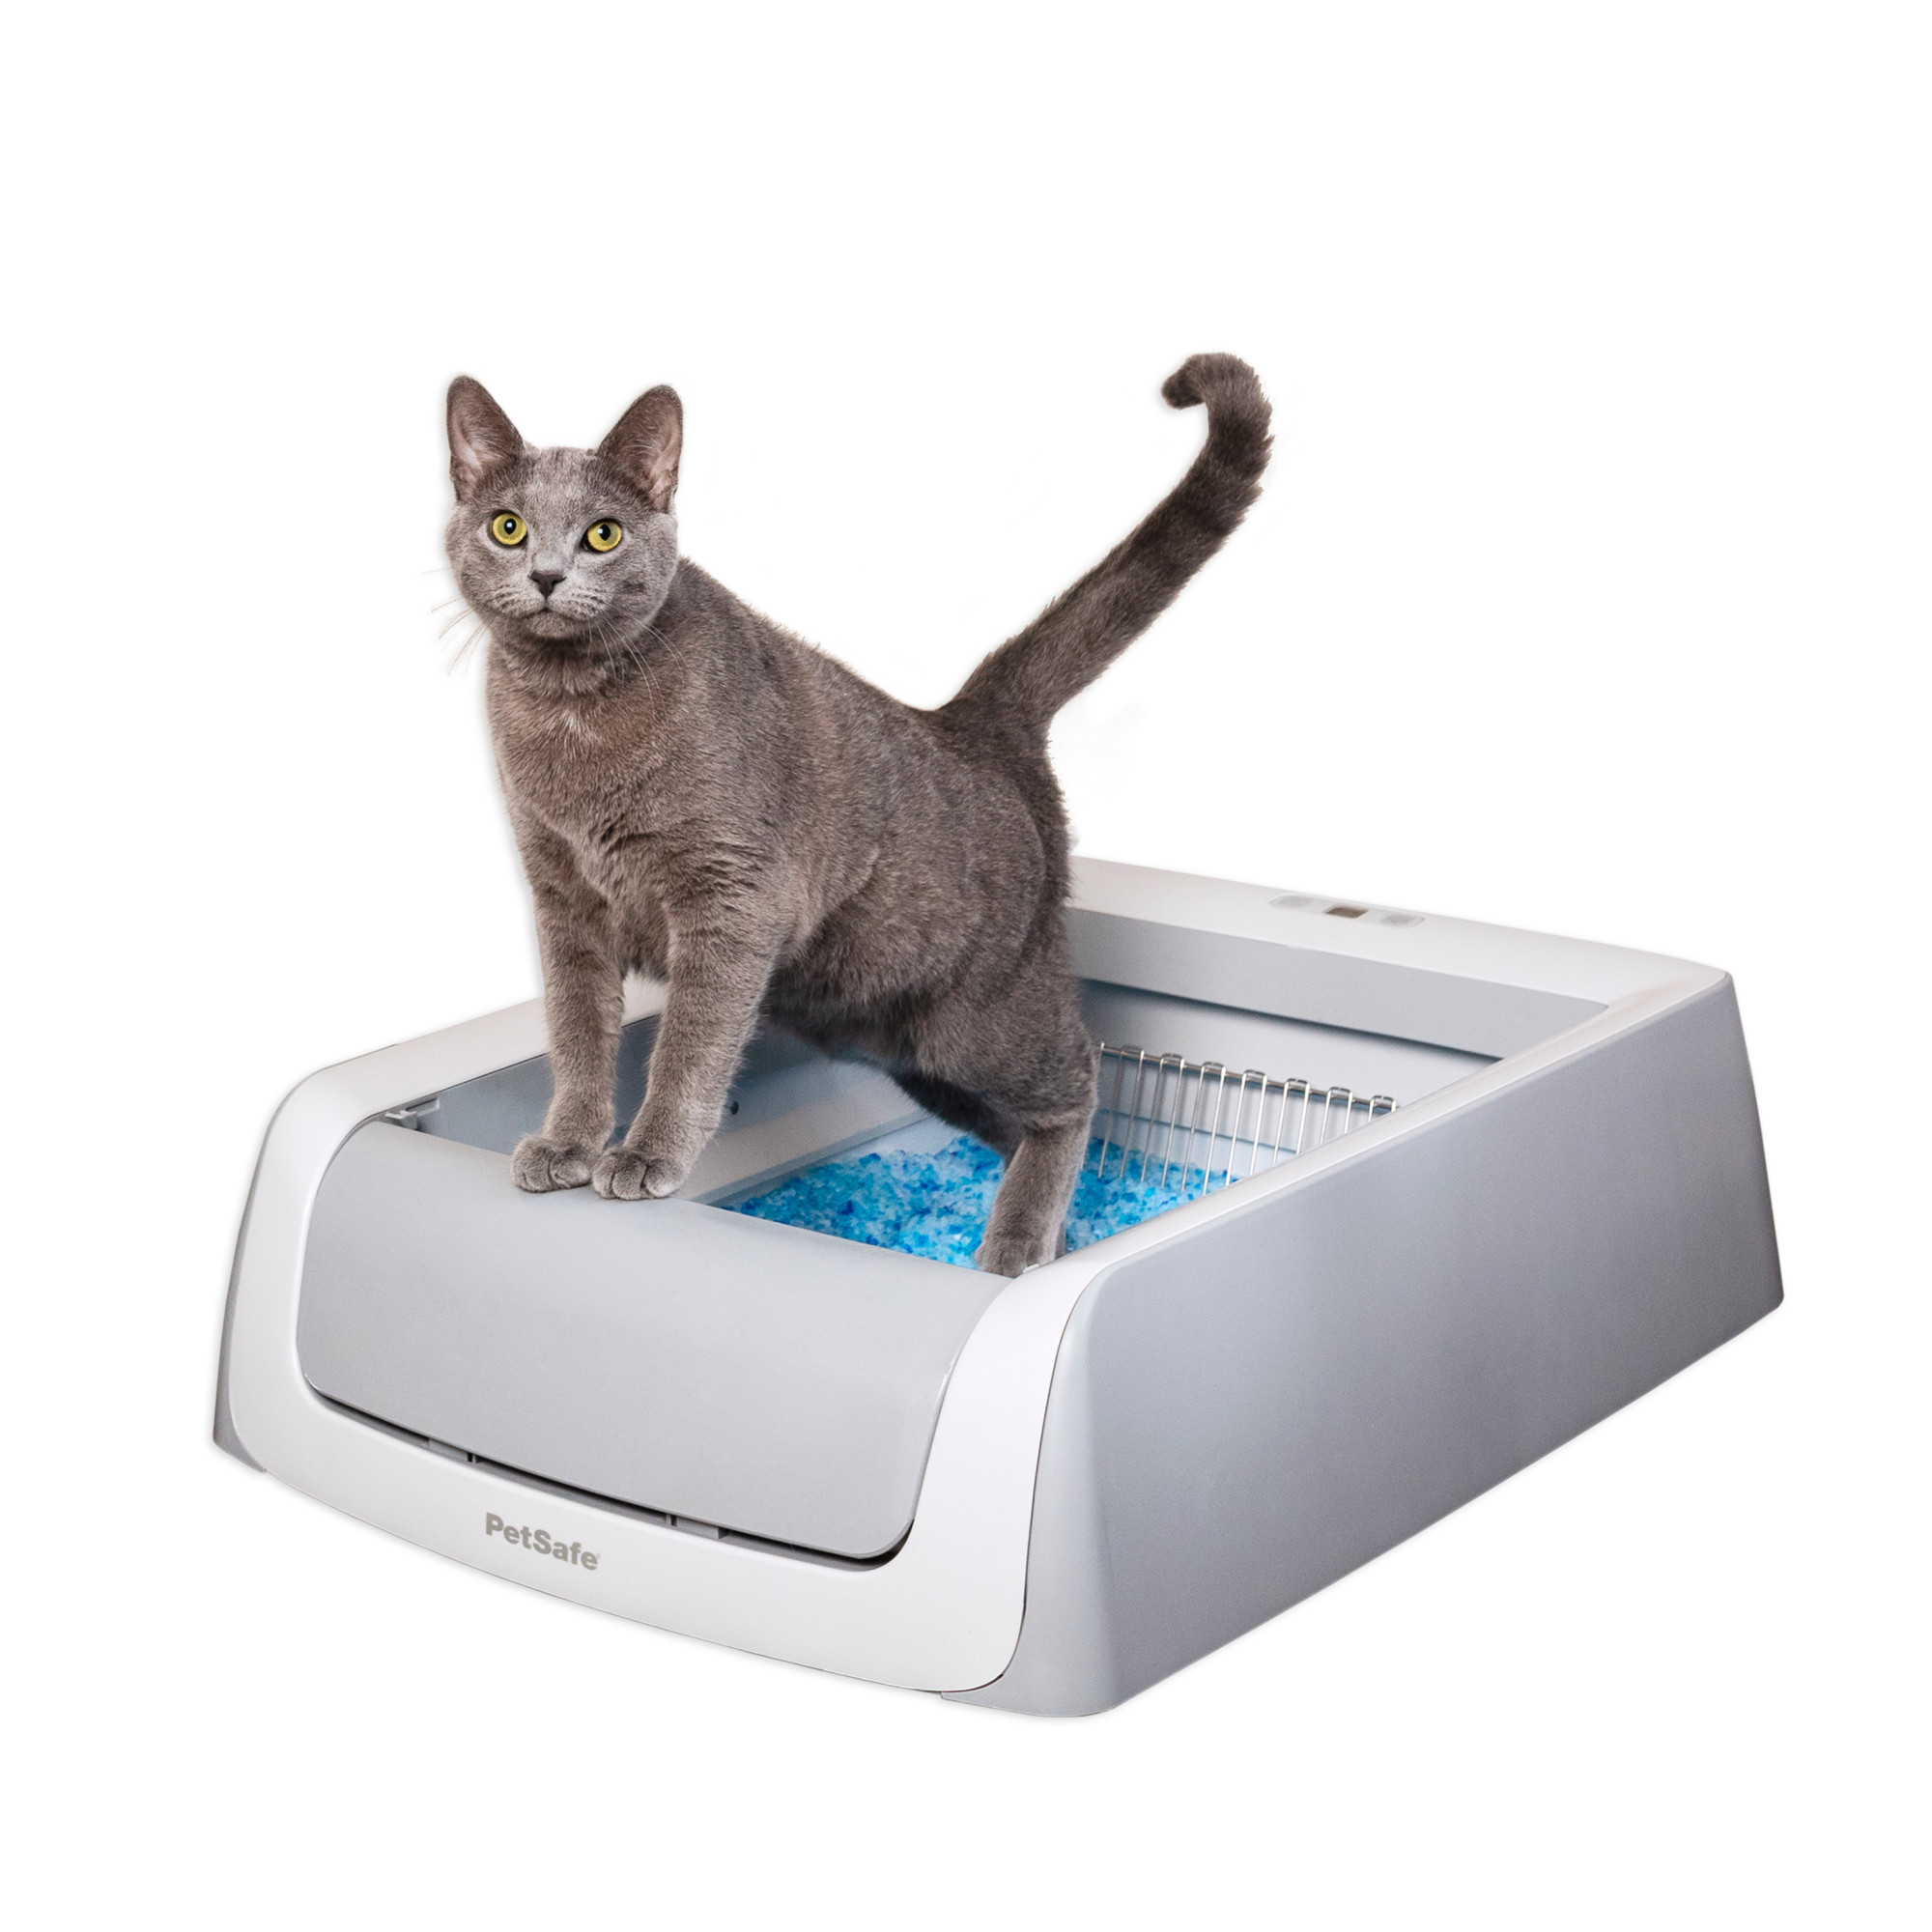 PetSafe ScoopFree Crystal Pro Self-Cleaning Cat Litter Box, Automatic, Unbeatable Odor Control, Gray - image 1 of 11